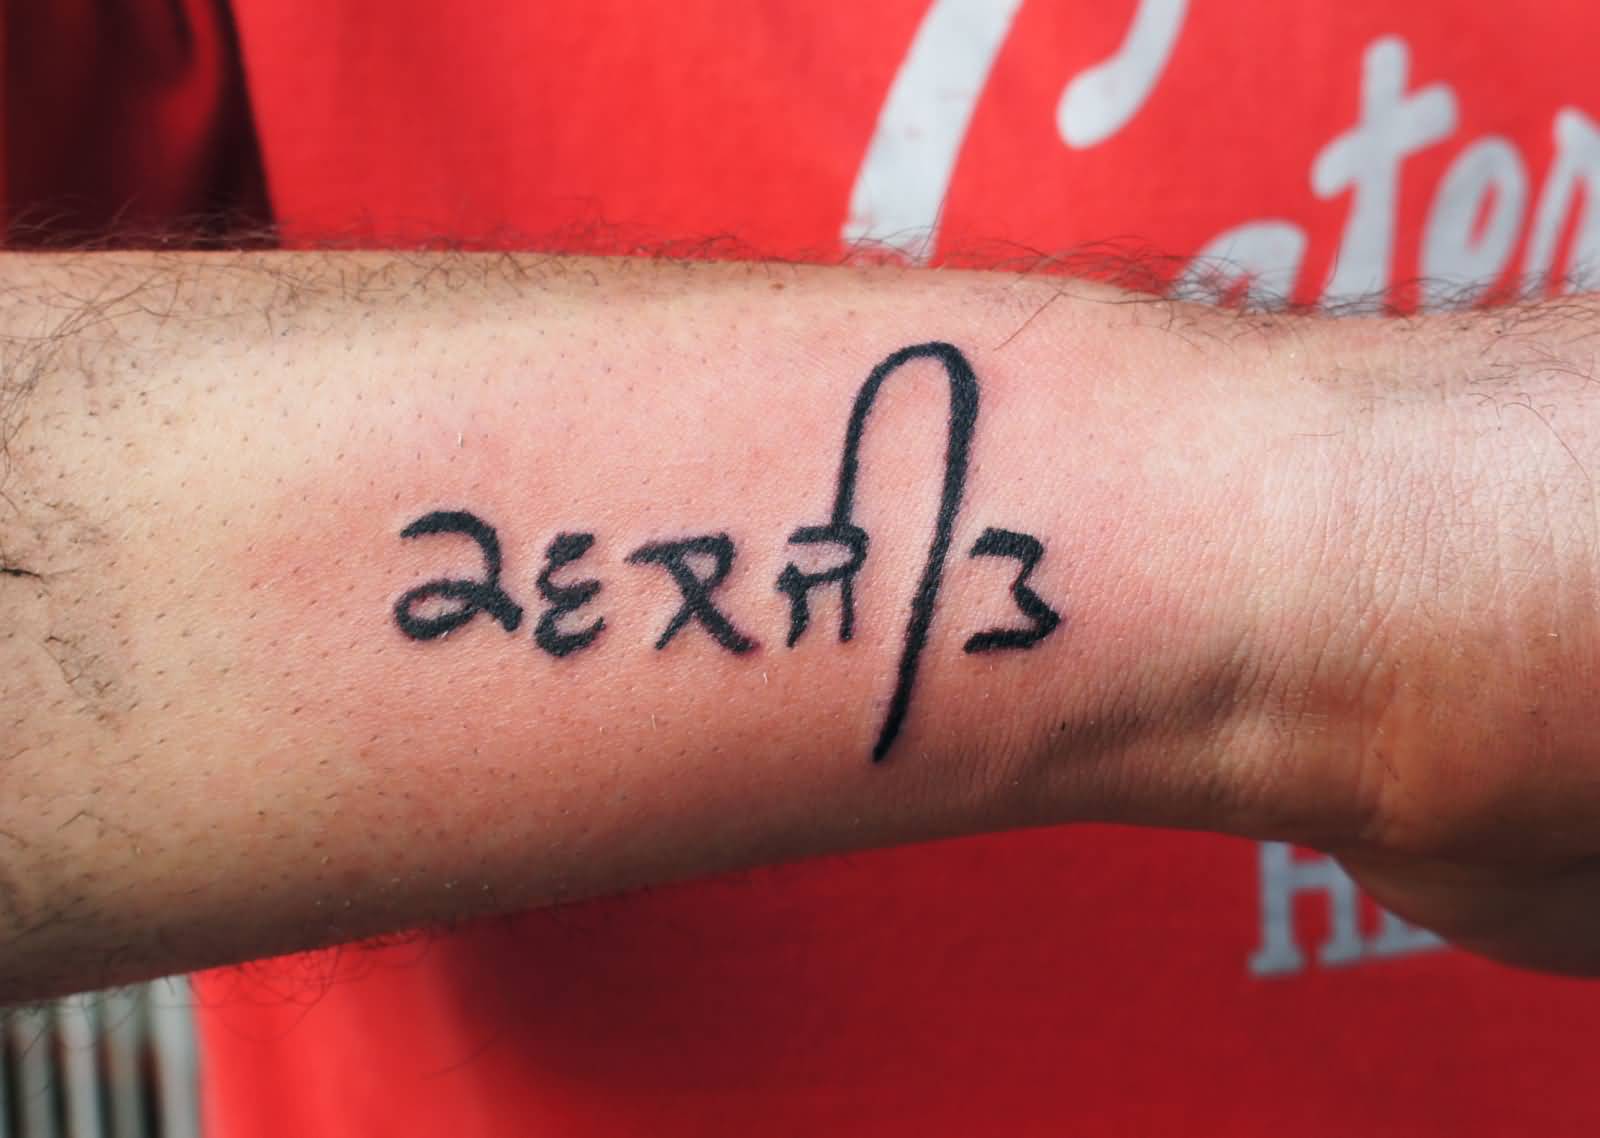 How to write Nirbhau and Nirvair for a tattoo in Punjabi, Hindi or Sanskrit  - Quora